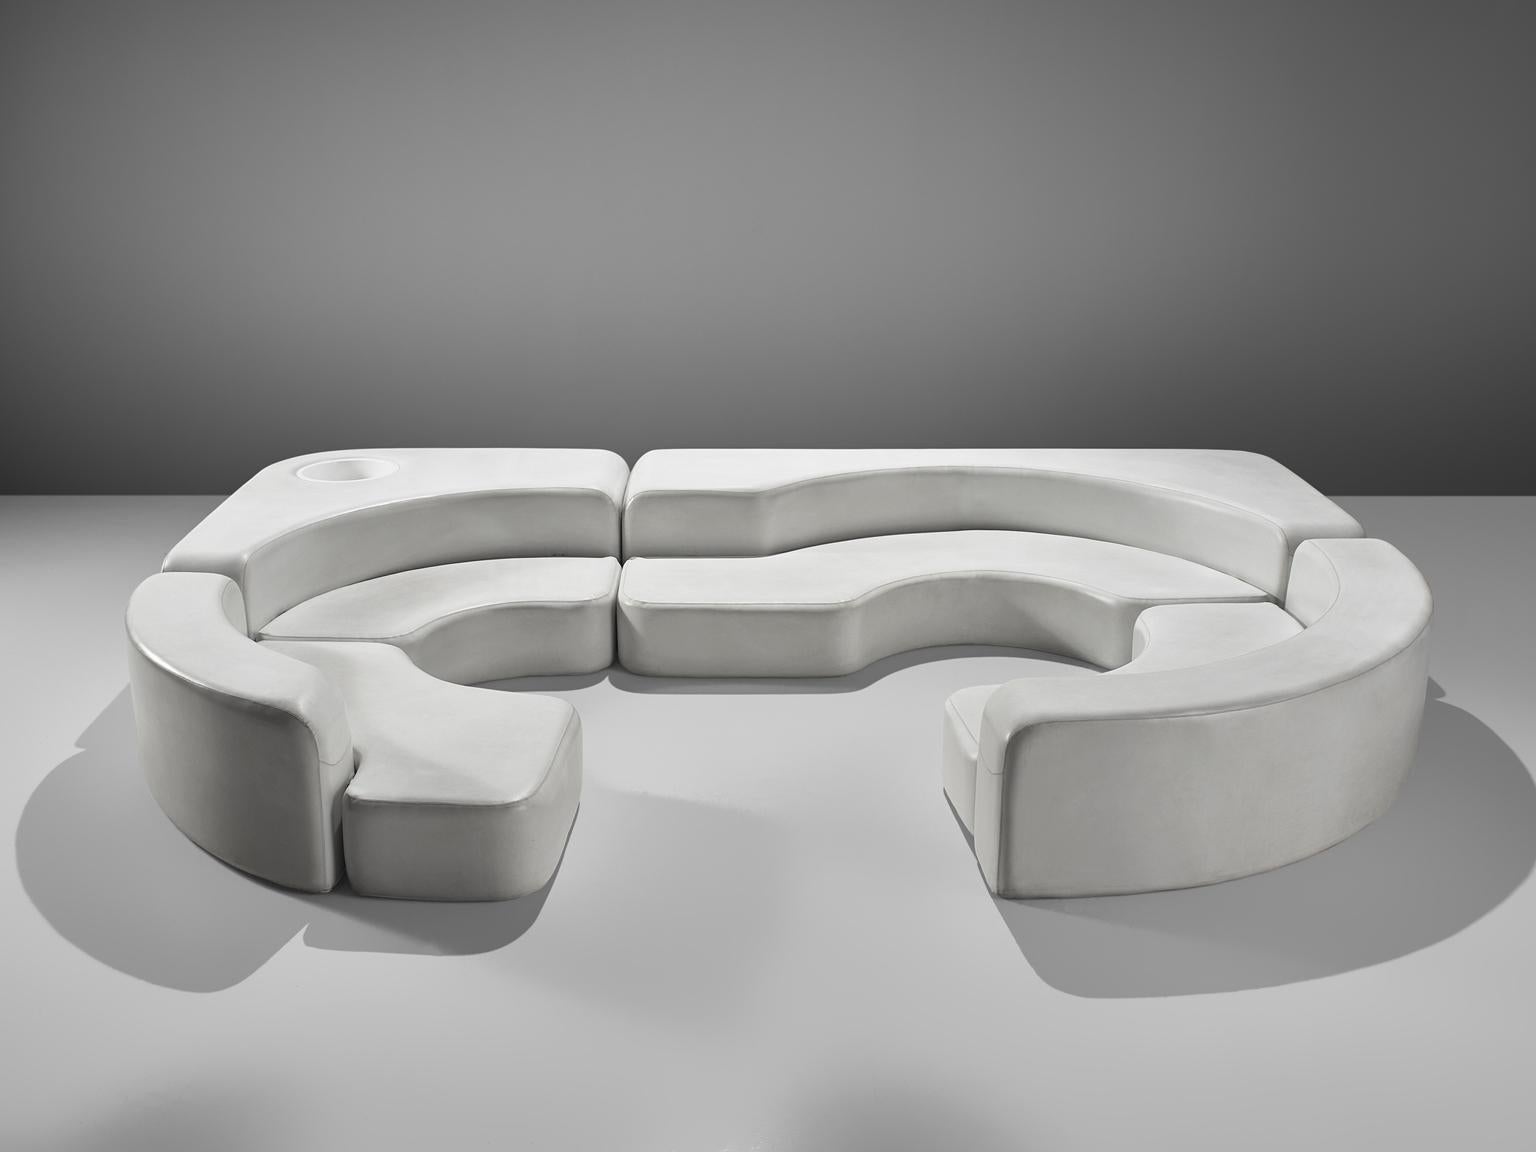 Ennio Chiggio for Nikol Internazionale, white faux leather sofa, Italy, 1970s

This important canapé Environ One is designed by Ennio Chiggo (1937-) for Nikol Internazionale in the 1970s. This rare modular sofa is very voluptuous and very large.